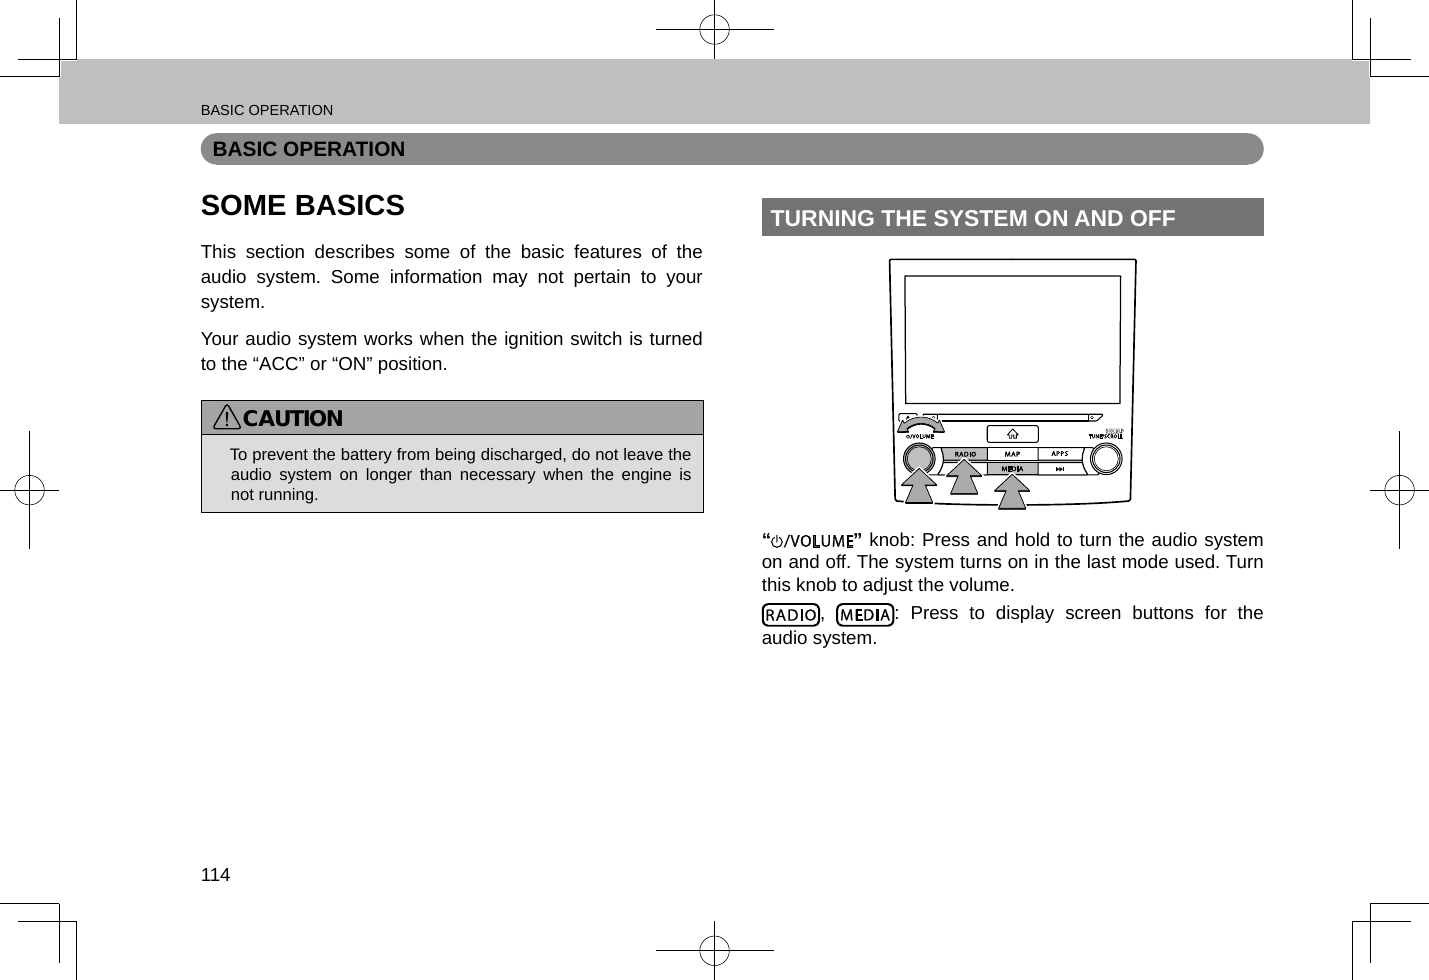 Page 115 of Harman BE2818 Automotive Infotainment Unit with Bluetooth User Manual 